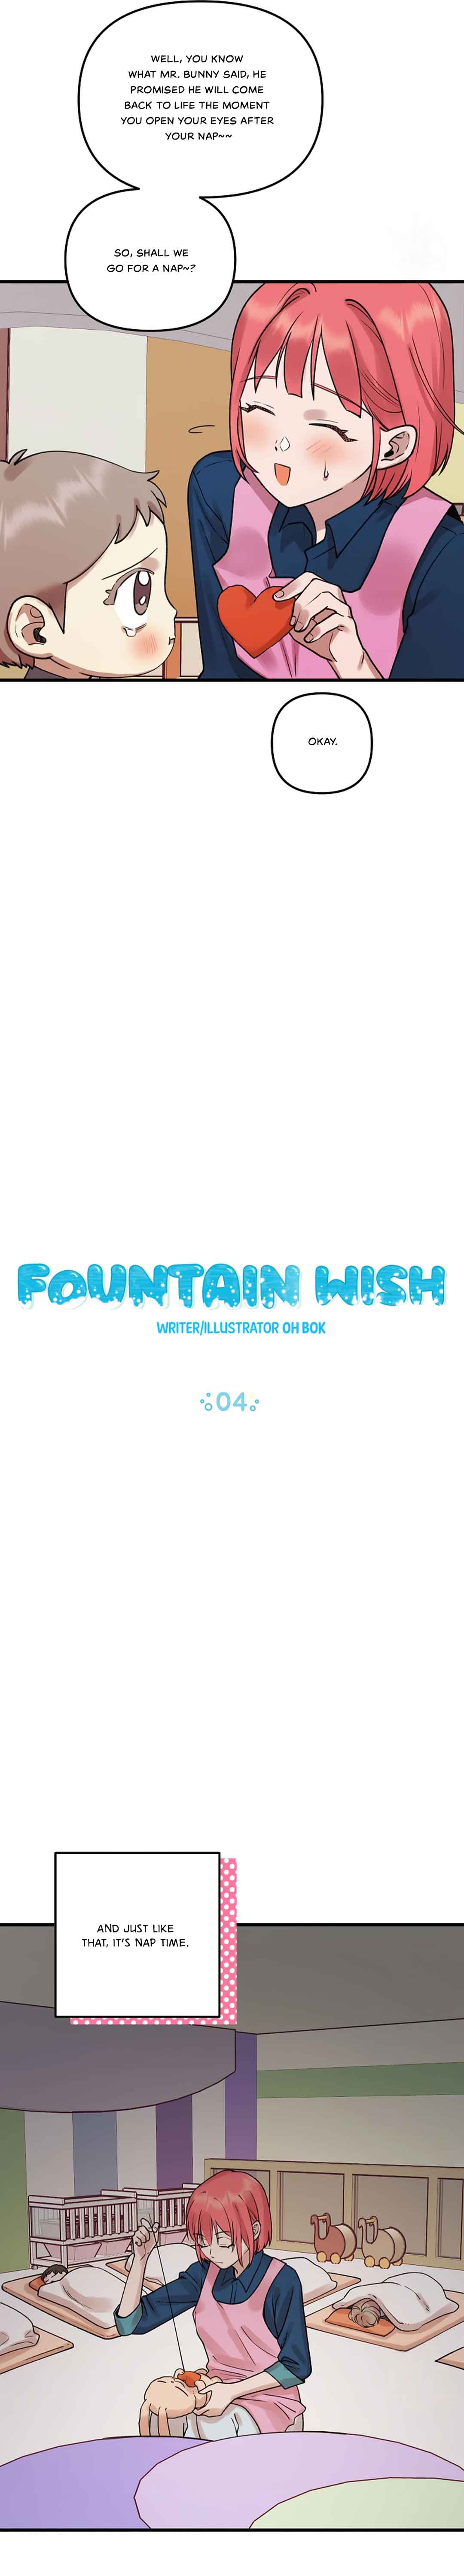 Fountain Wish chapter 4